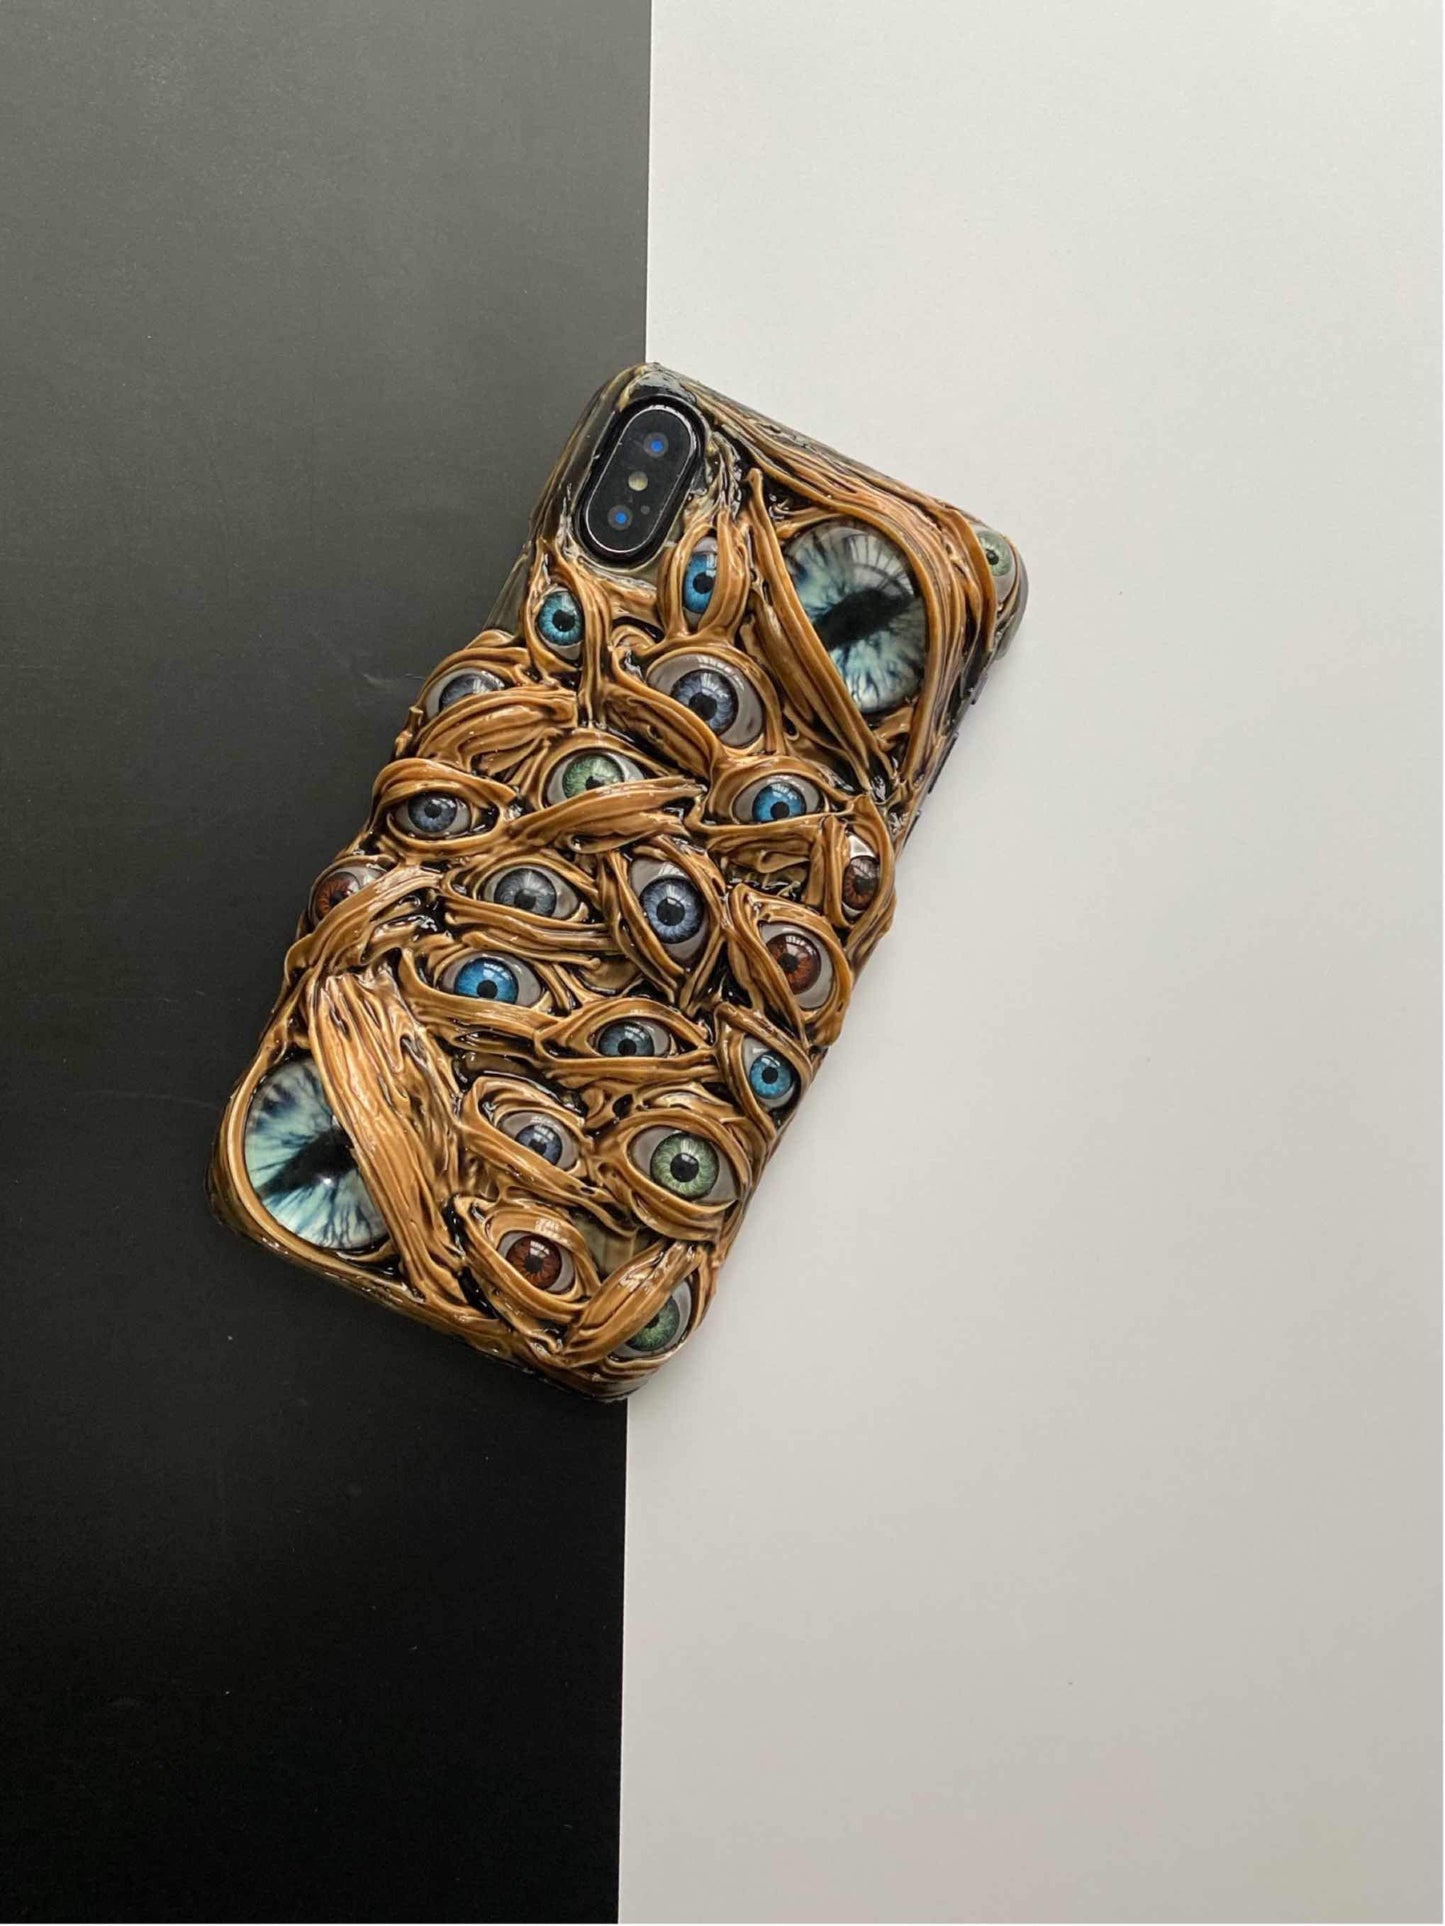 Techypop iPhone Case The Monster Eyes Handmade Designer iPhone Case For iPhone 12 SE 11 Pro Max X XS Max XR 7 8 Plus